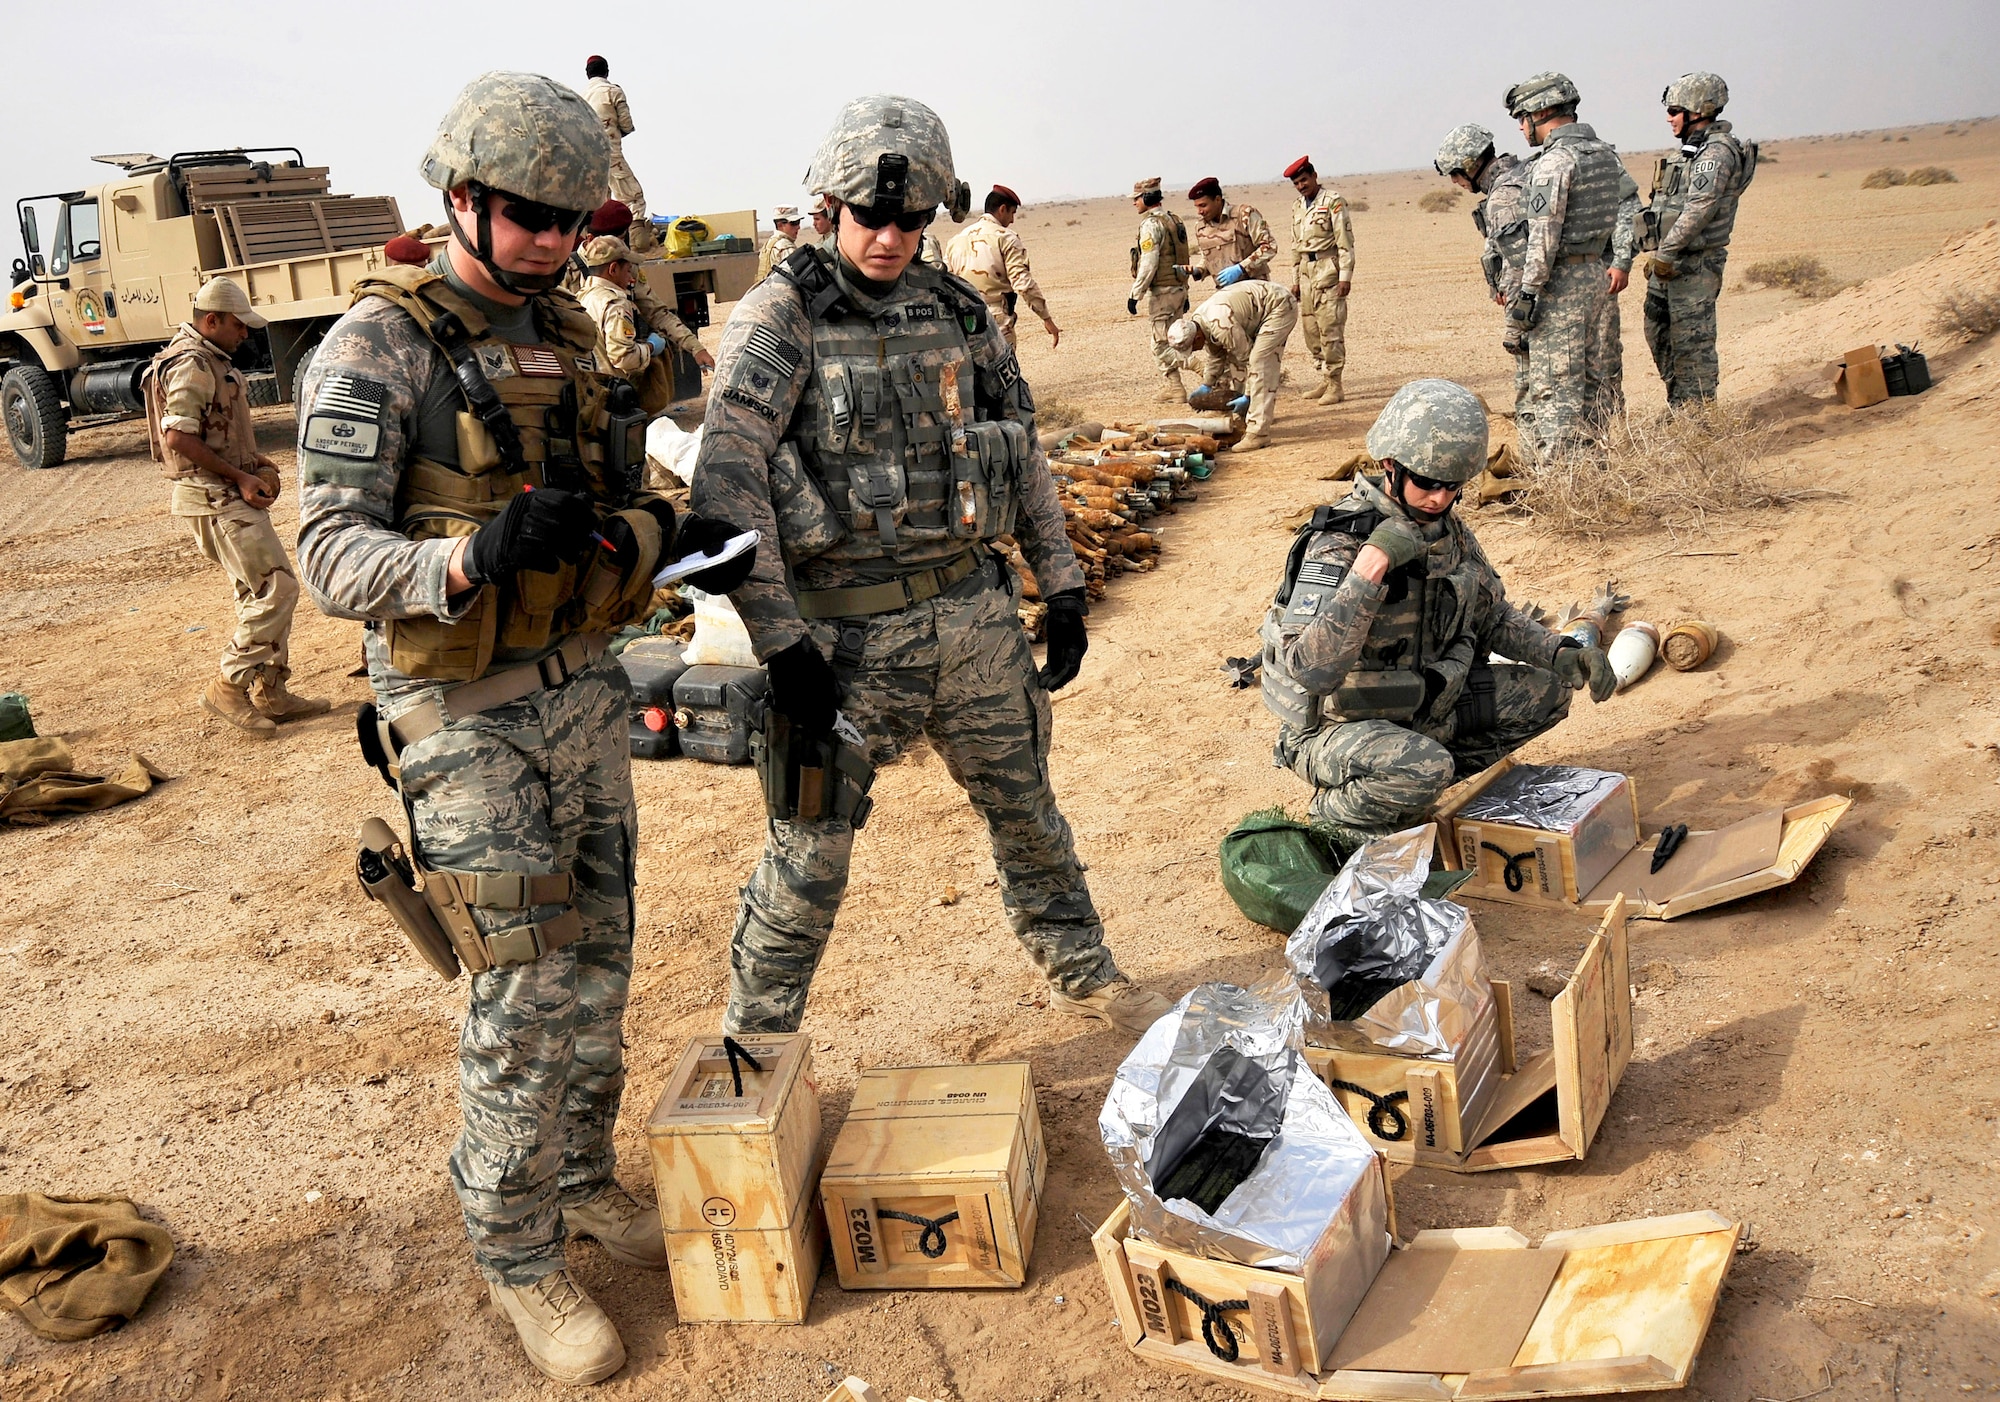 Air Force explosive ordnance disposal technicians prepare for a controlled detonation by taking inventory of the number of boxes of C-4 they have available, Nov. 23, 2009, at Mahmudiyah, Iraq. The purpose of the control detonation is to mitigate explosives hazards and limit the enemy's warfighting capabilities in Iraq. The EOD Airmen are from the 447th Expeditionary Civil Engineer Squadron, deployed to Mahmudiyah, Iraq. (U.S. Air Force photo/Staff Sgt. Angelita Lawrence)